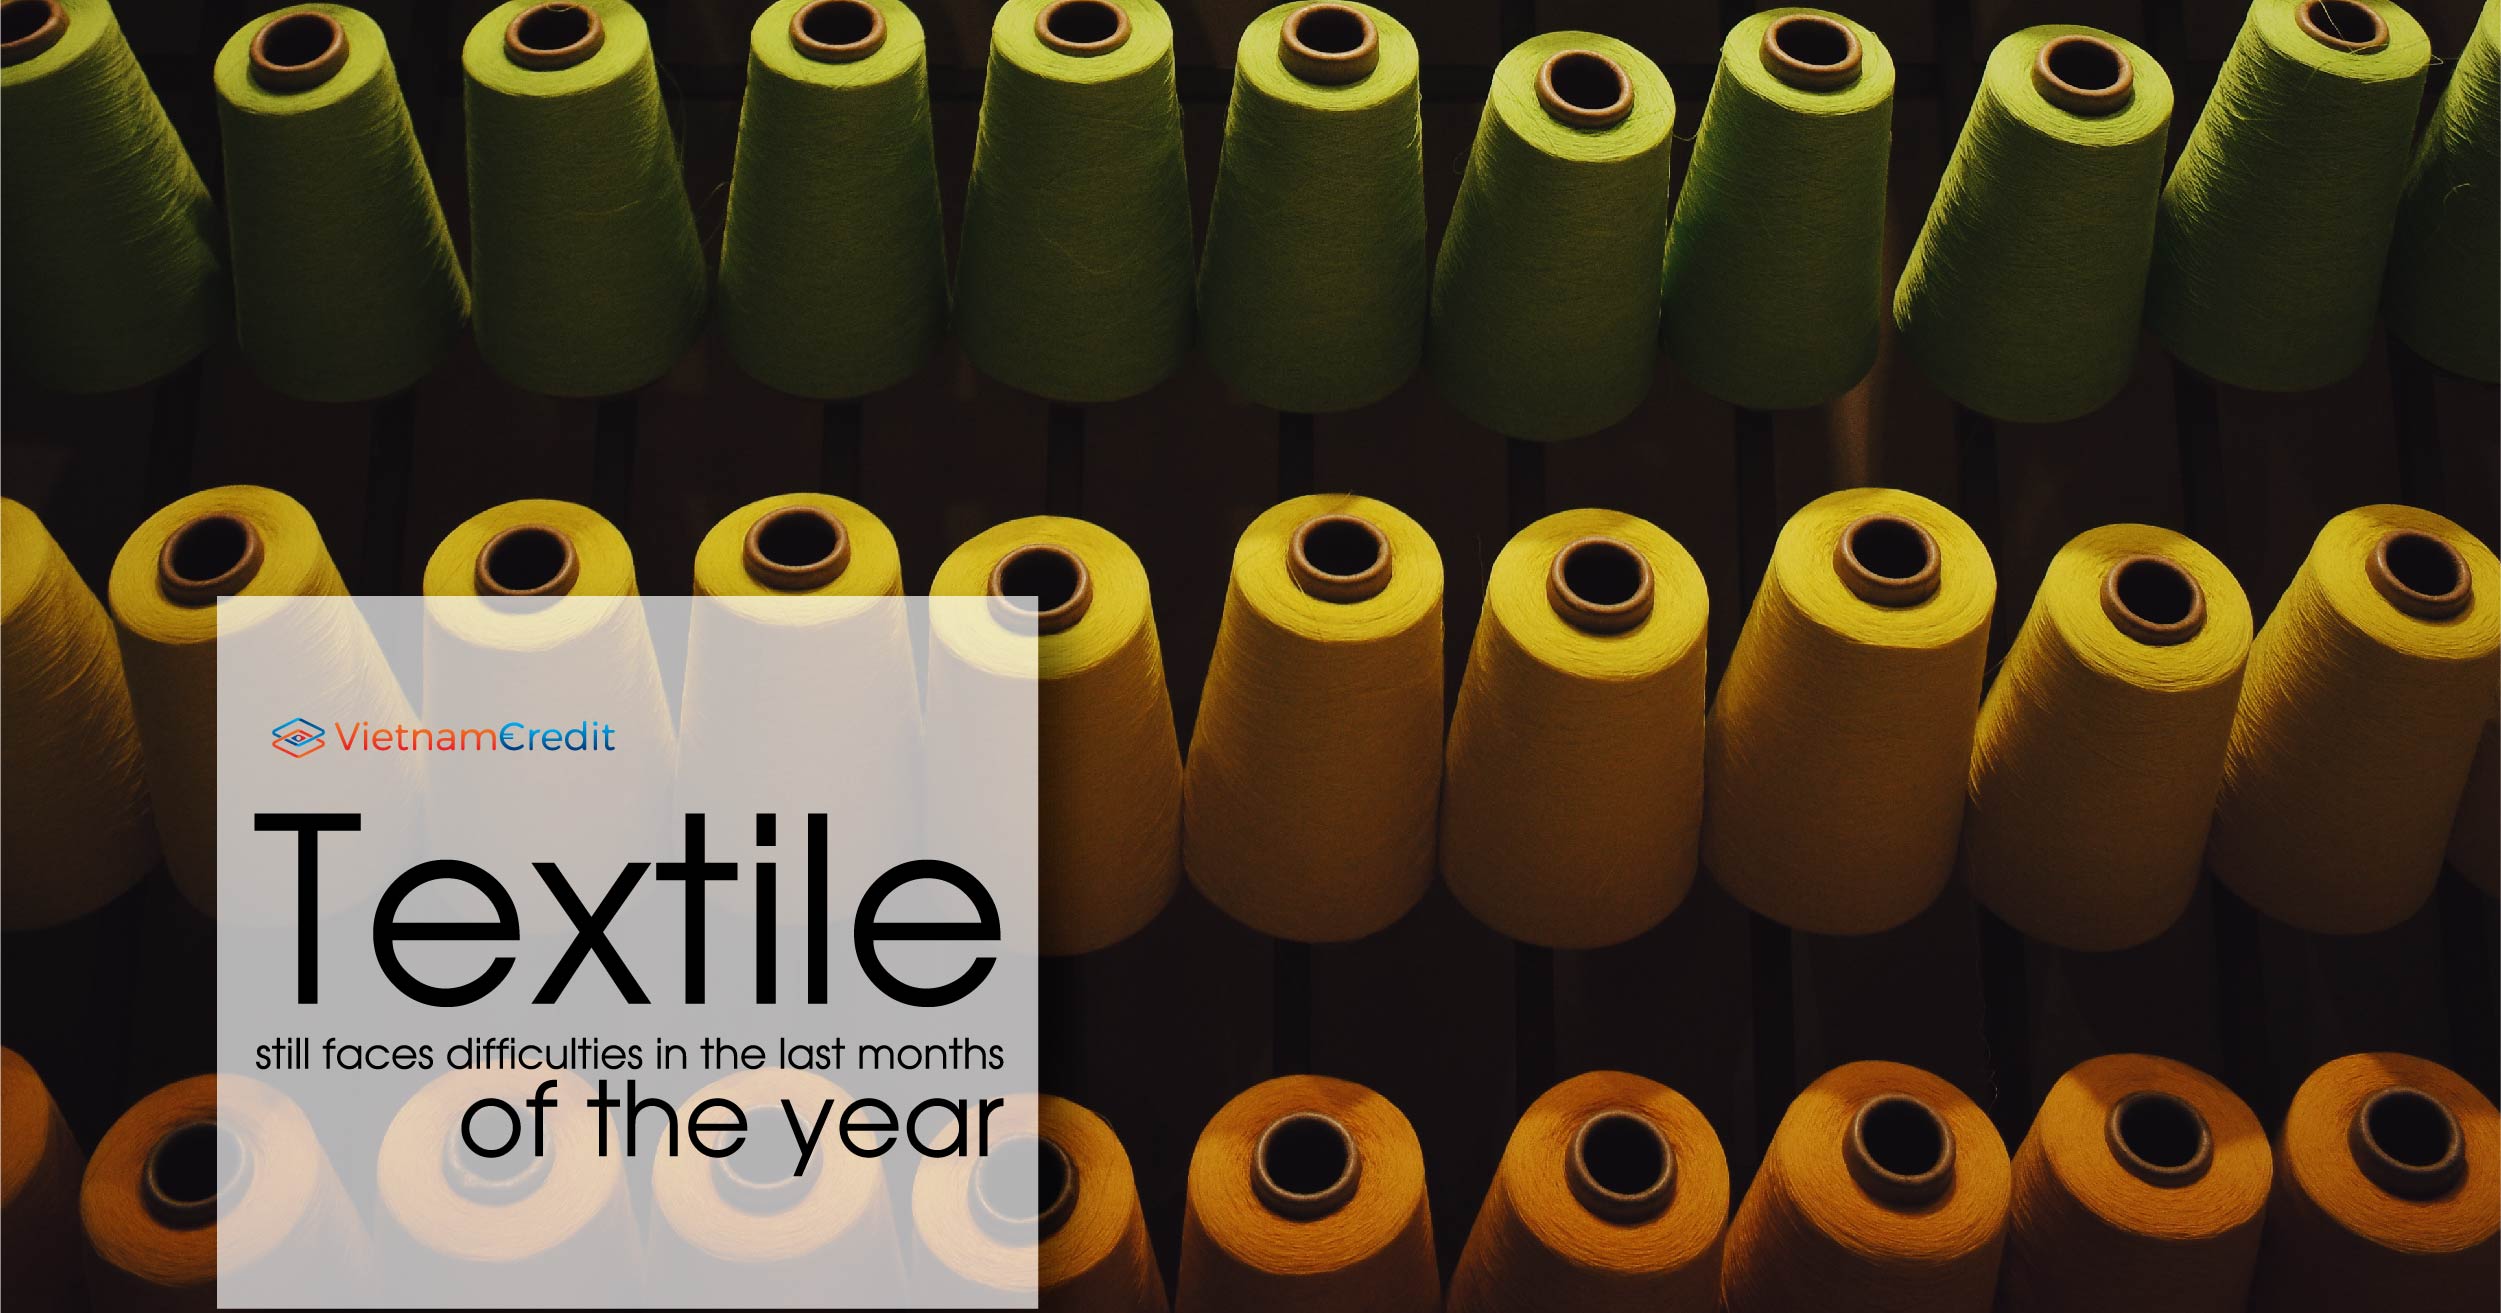 Textile still faces difficulties in the last months of the year